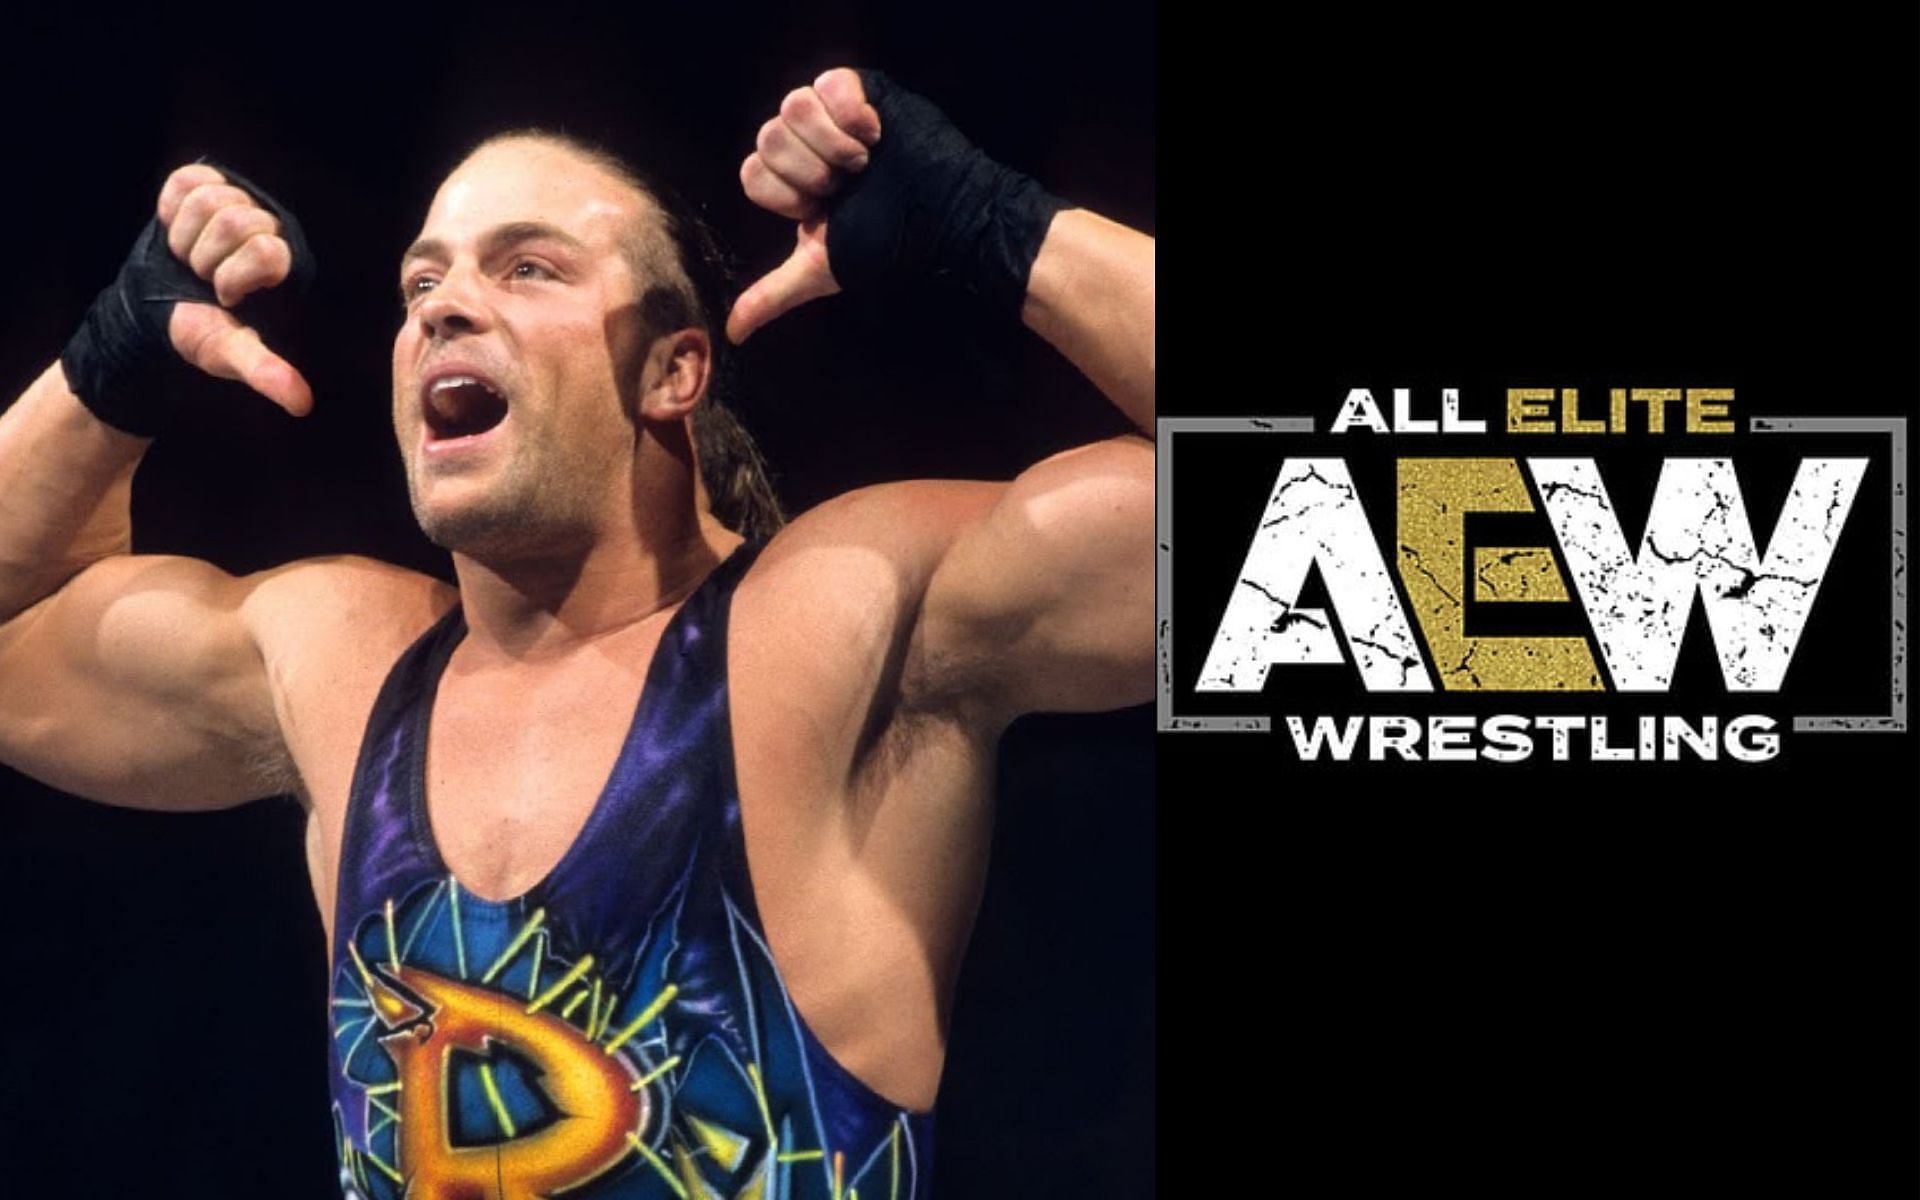 Former WWE Champion RVD will wrestle a young AEW star.